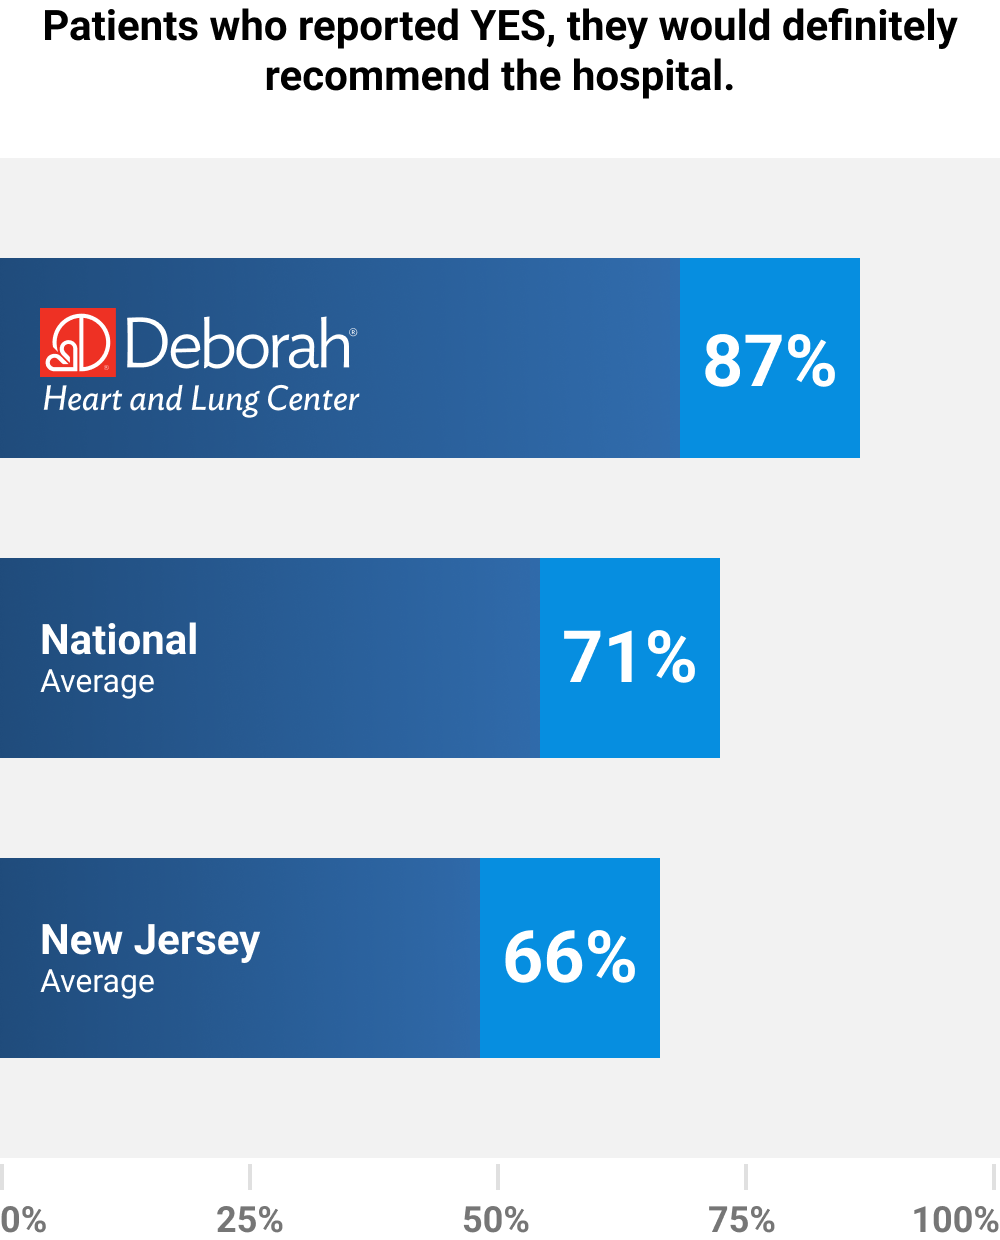 Patients who reported YES, they would definitely recommend the hospital. Deborah: 87%, National Average: 71%, New Jersey Average: 66%